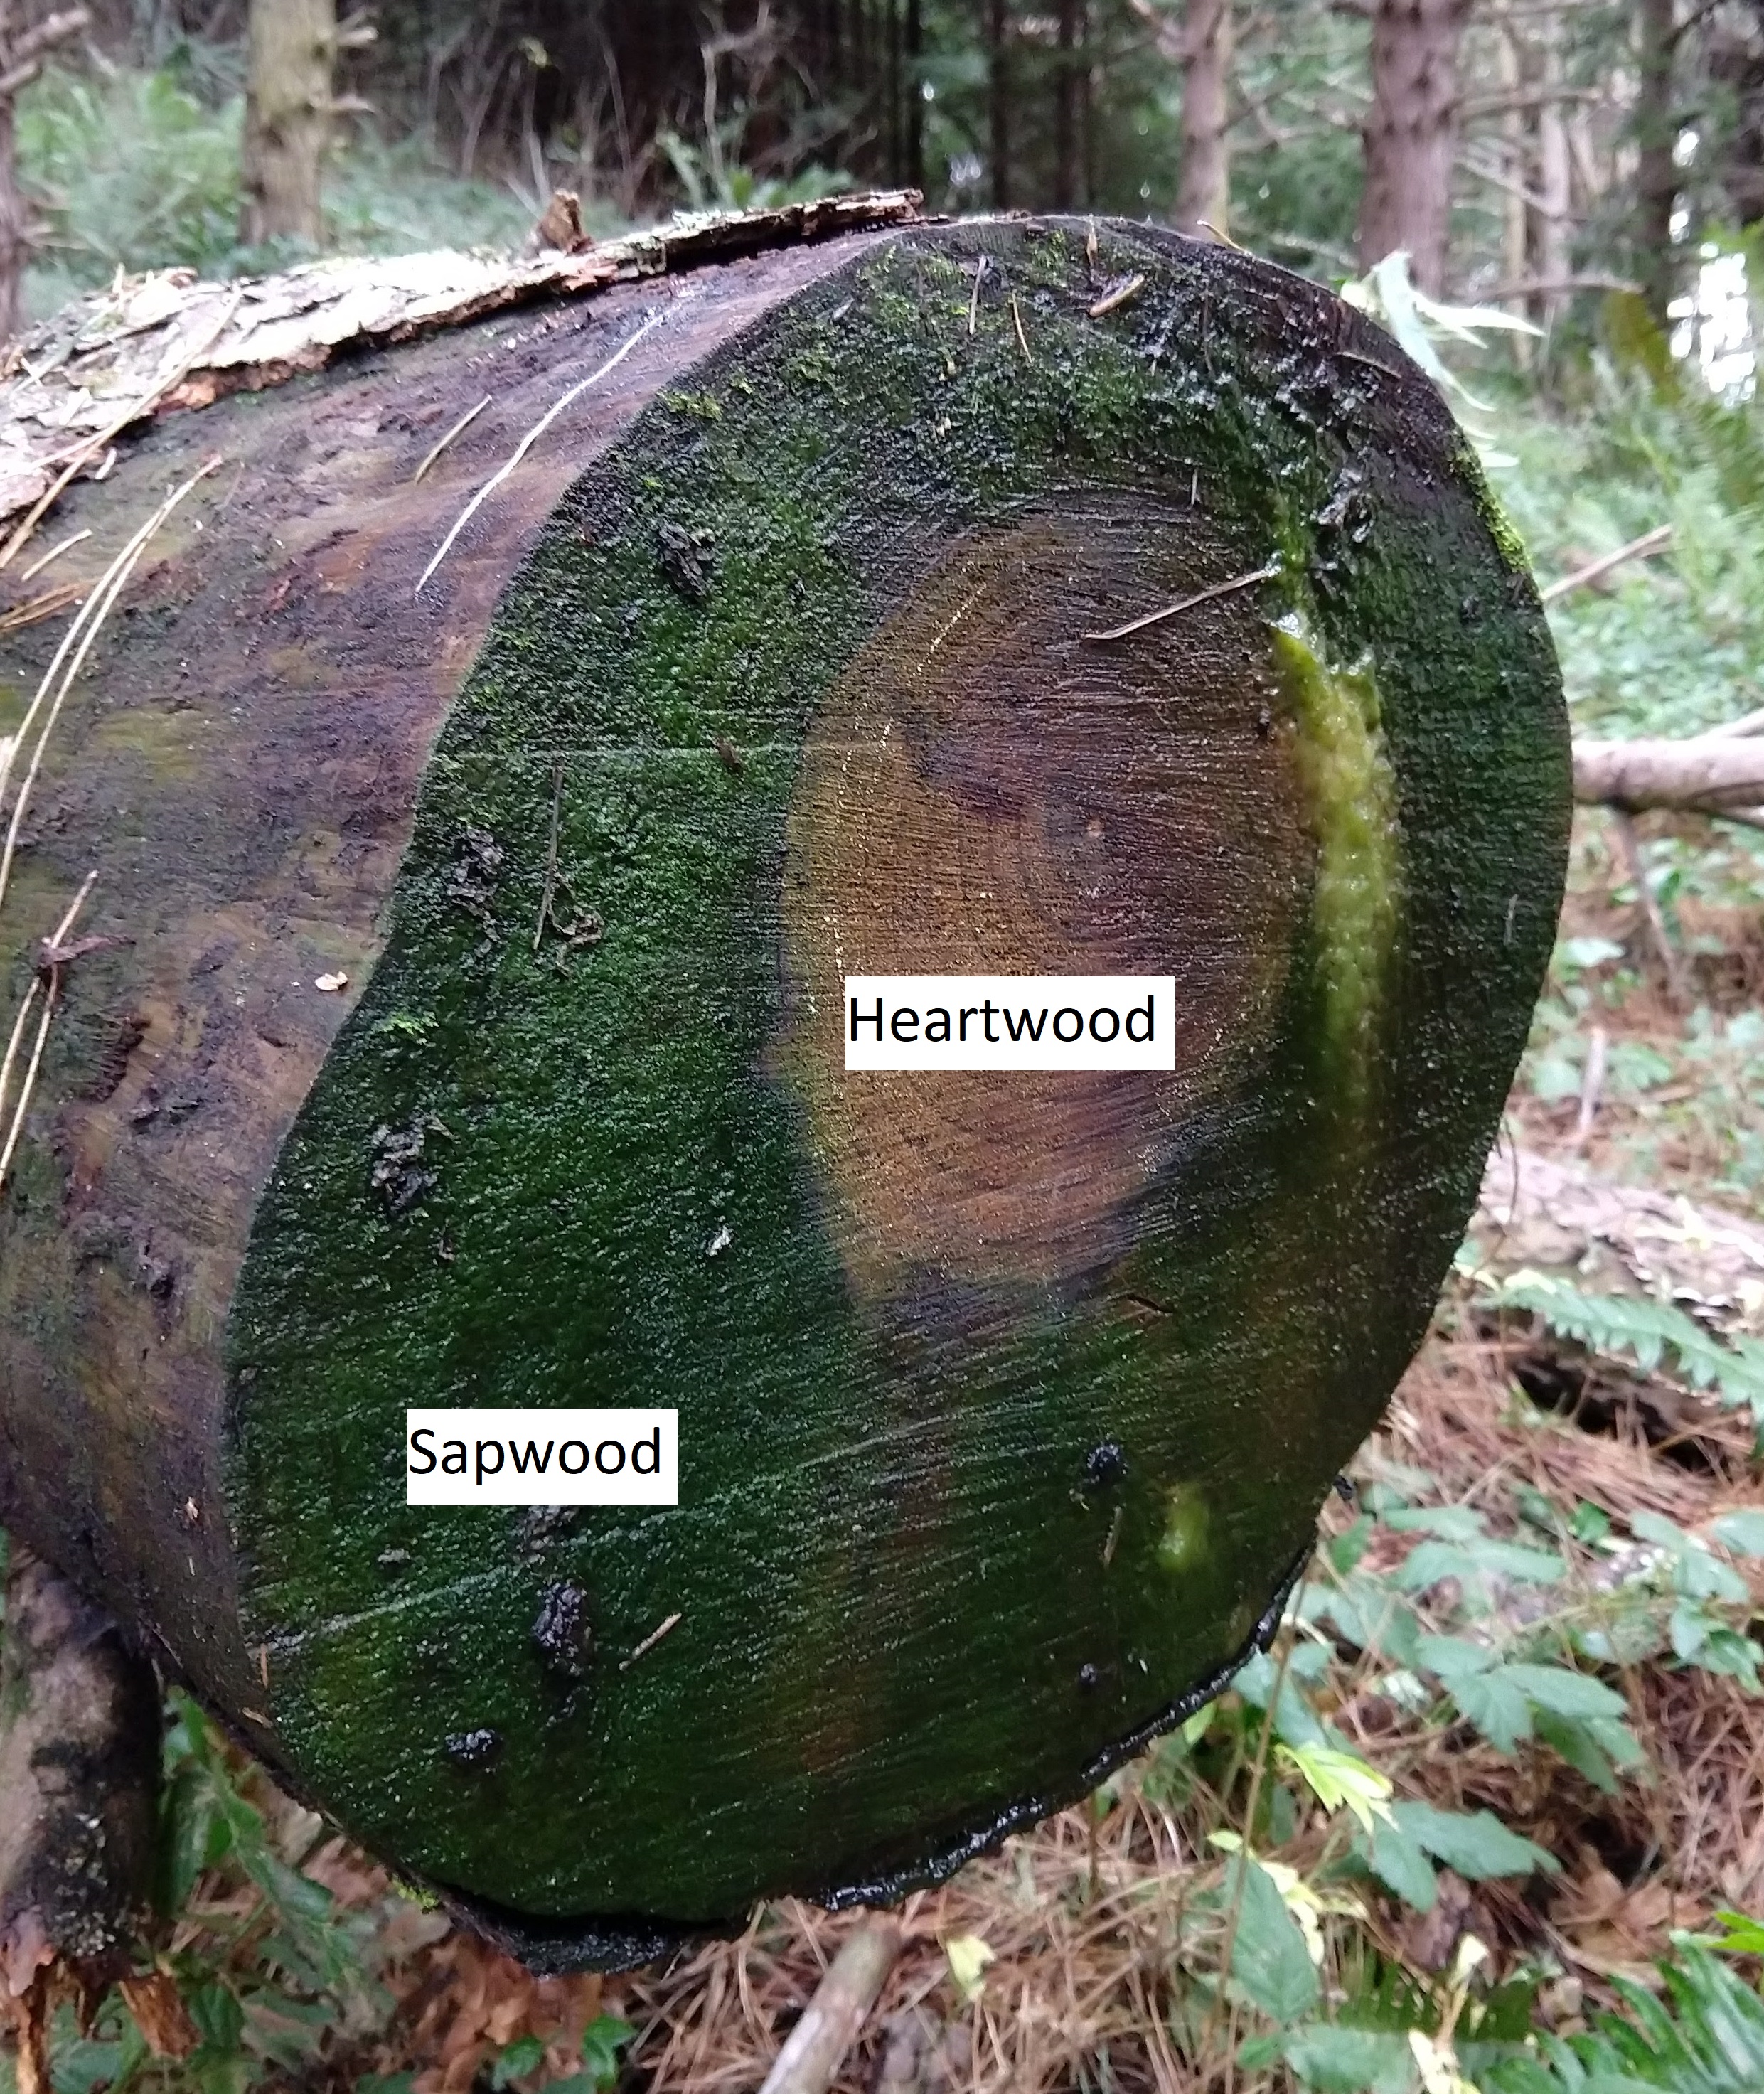 A cut log with green slime (likely algae and/or cyanobacteria) in the sapwood, but not in the heartwood